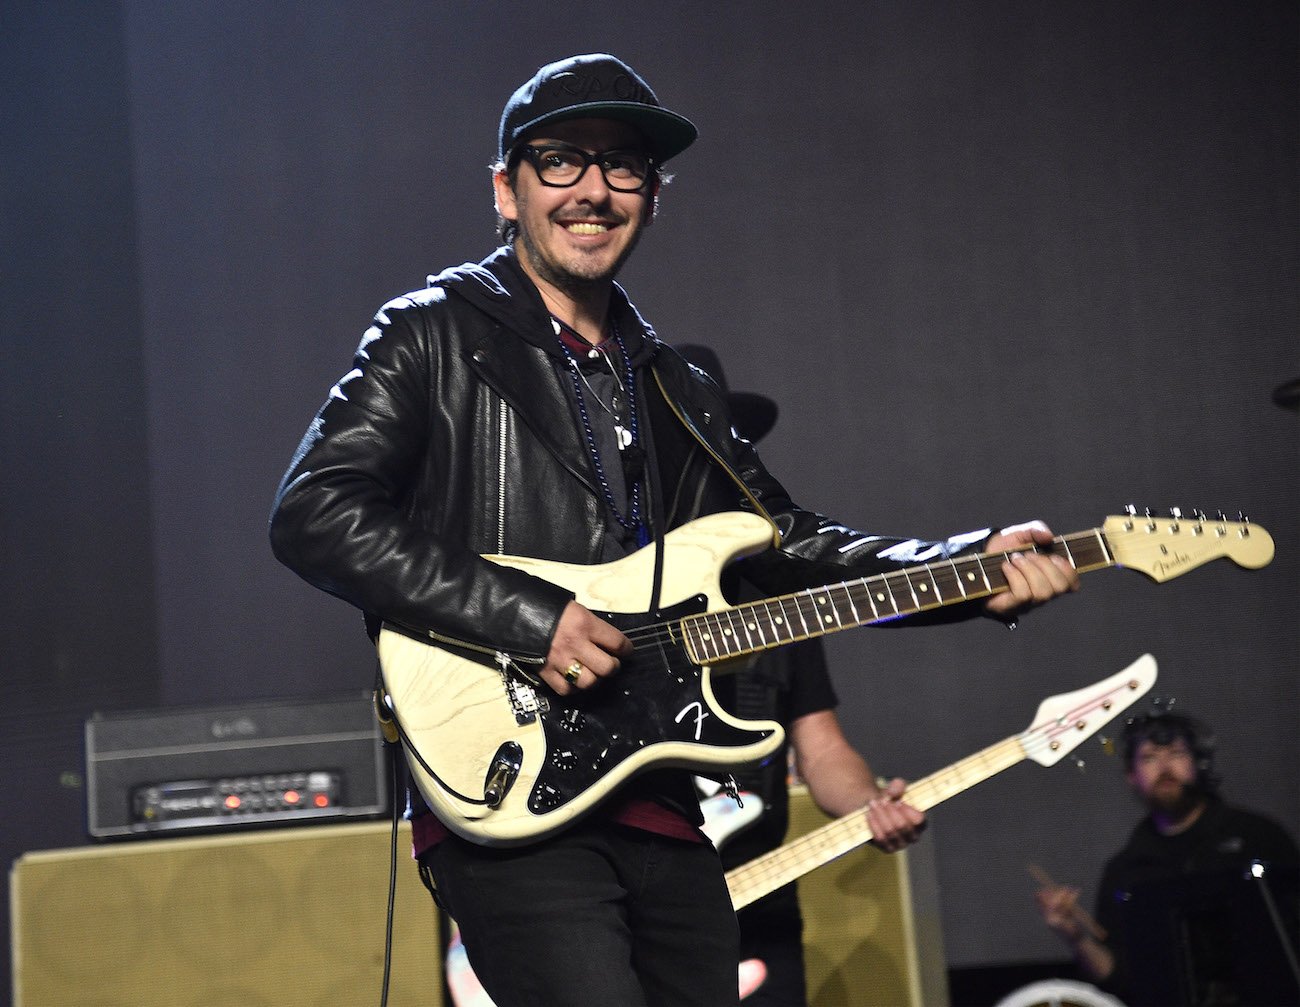 Dhani Harrison performing at the Rock & Roll Hall of Fame inductions 2017.